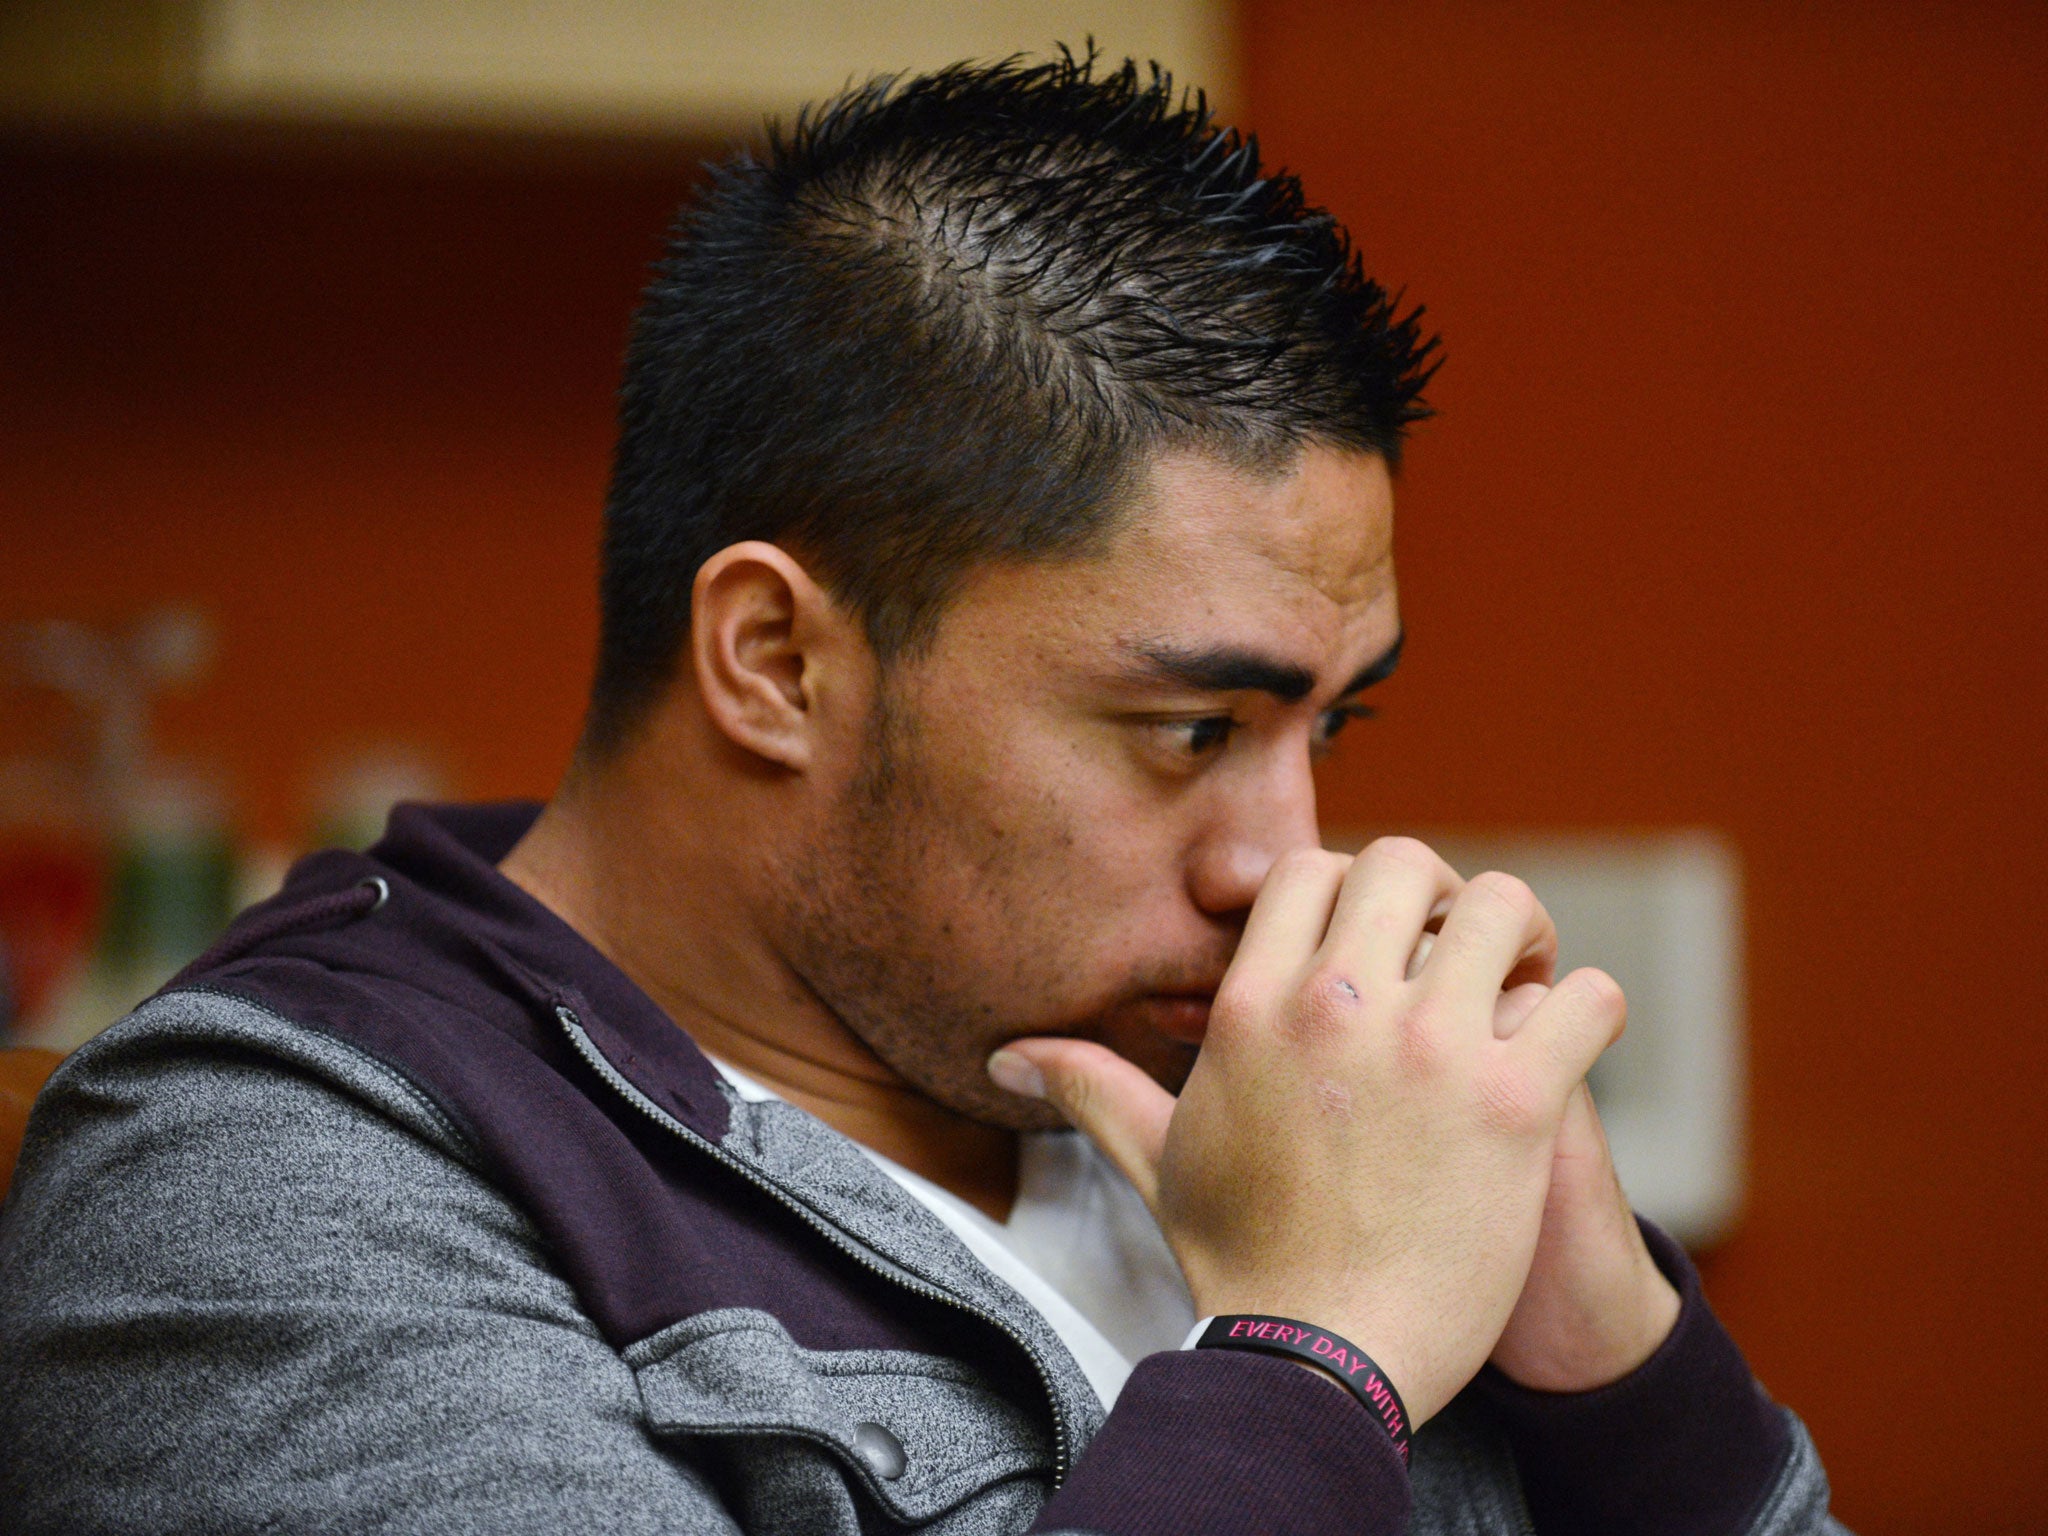 Missing person: The Manti Te’o headlines went from hero to hoax after his heart-warming tale turned into a whodunit